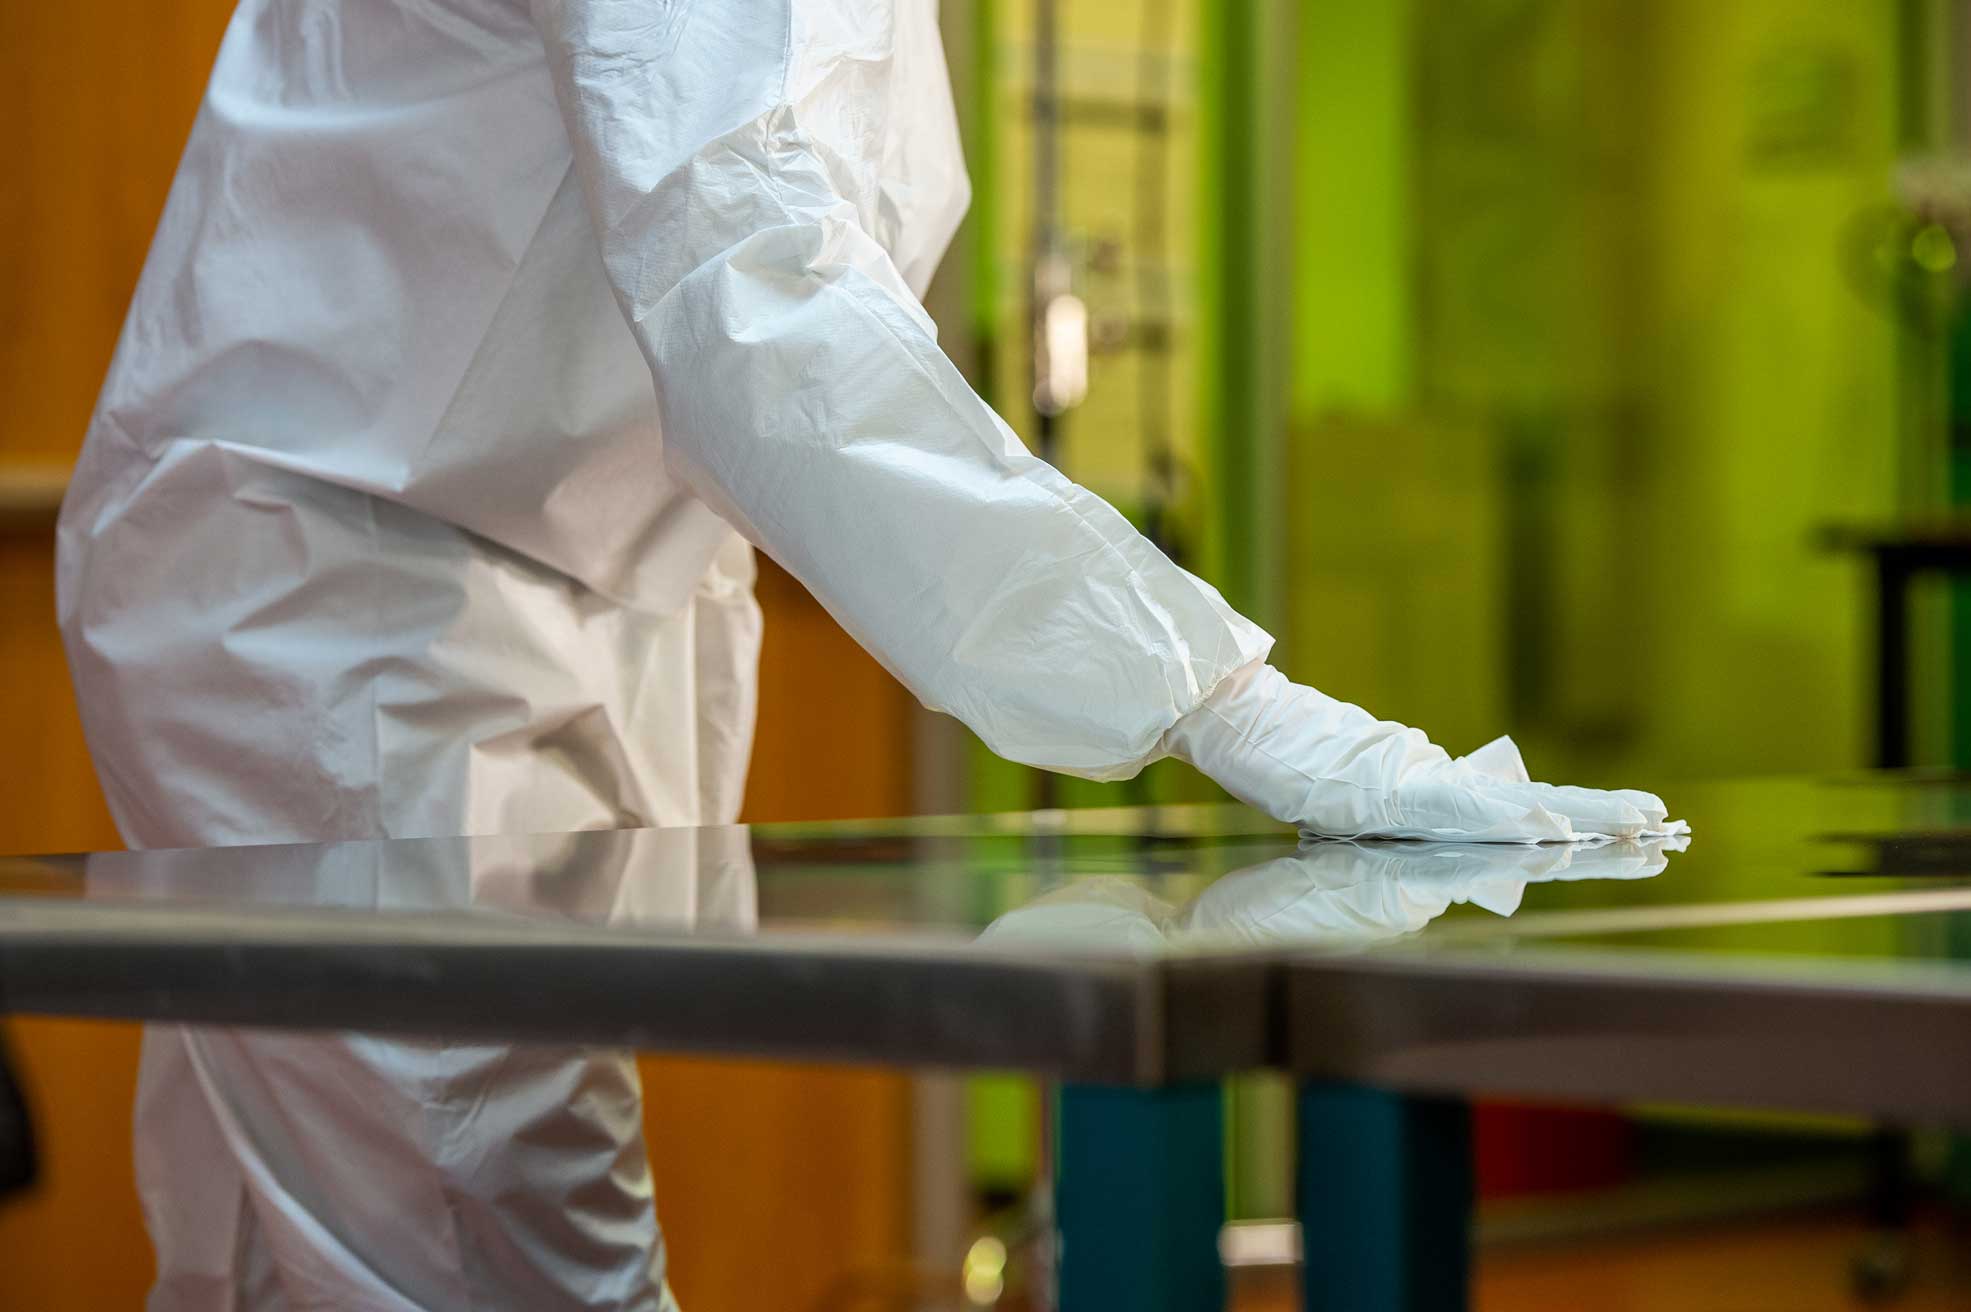 A person in a protective suit wiping a counter.